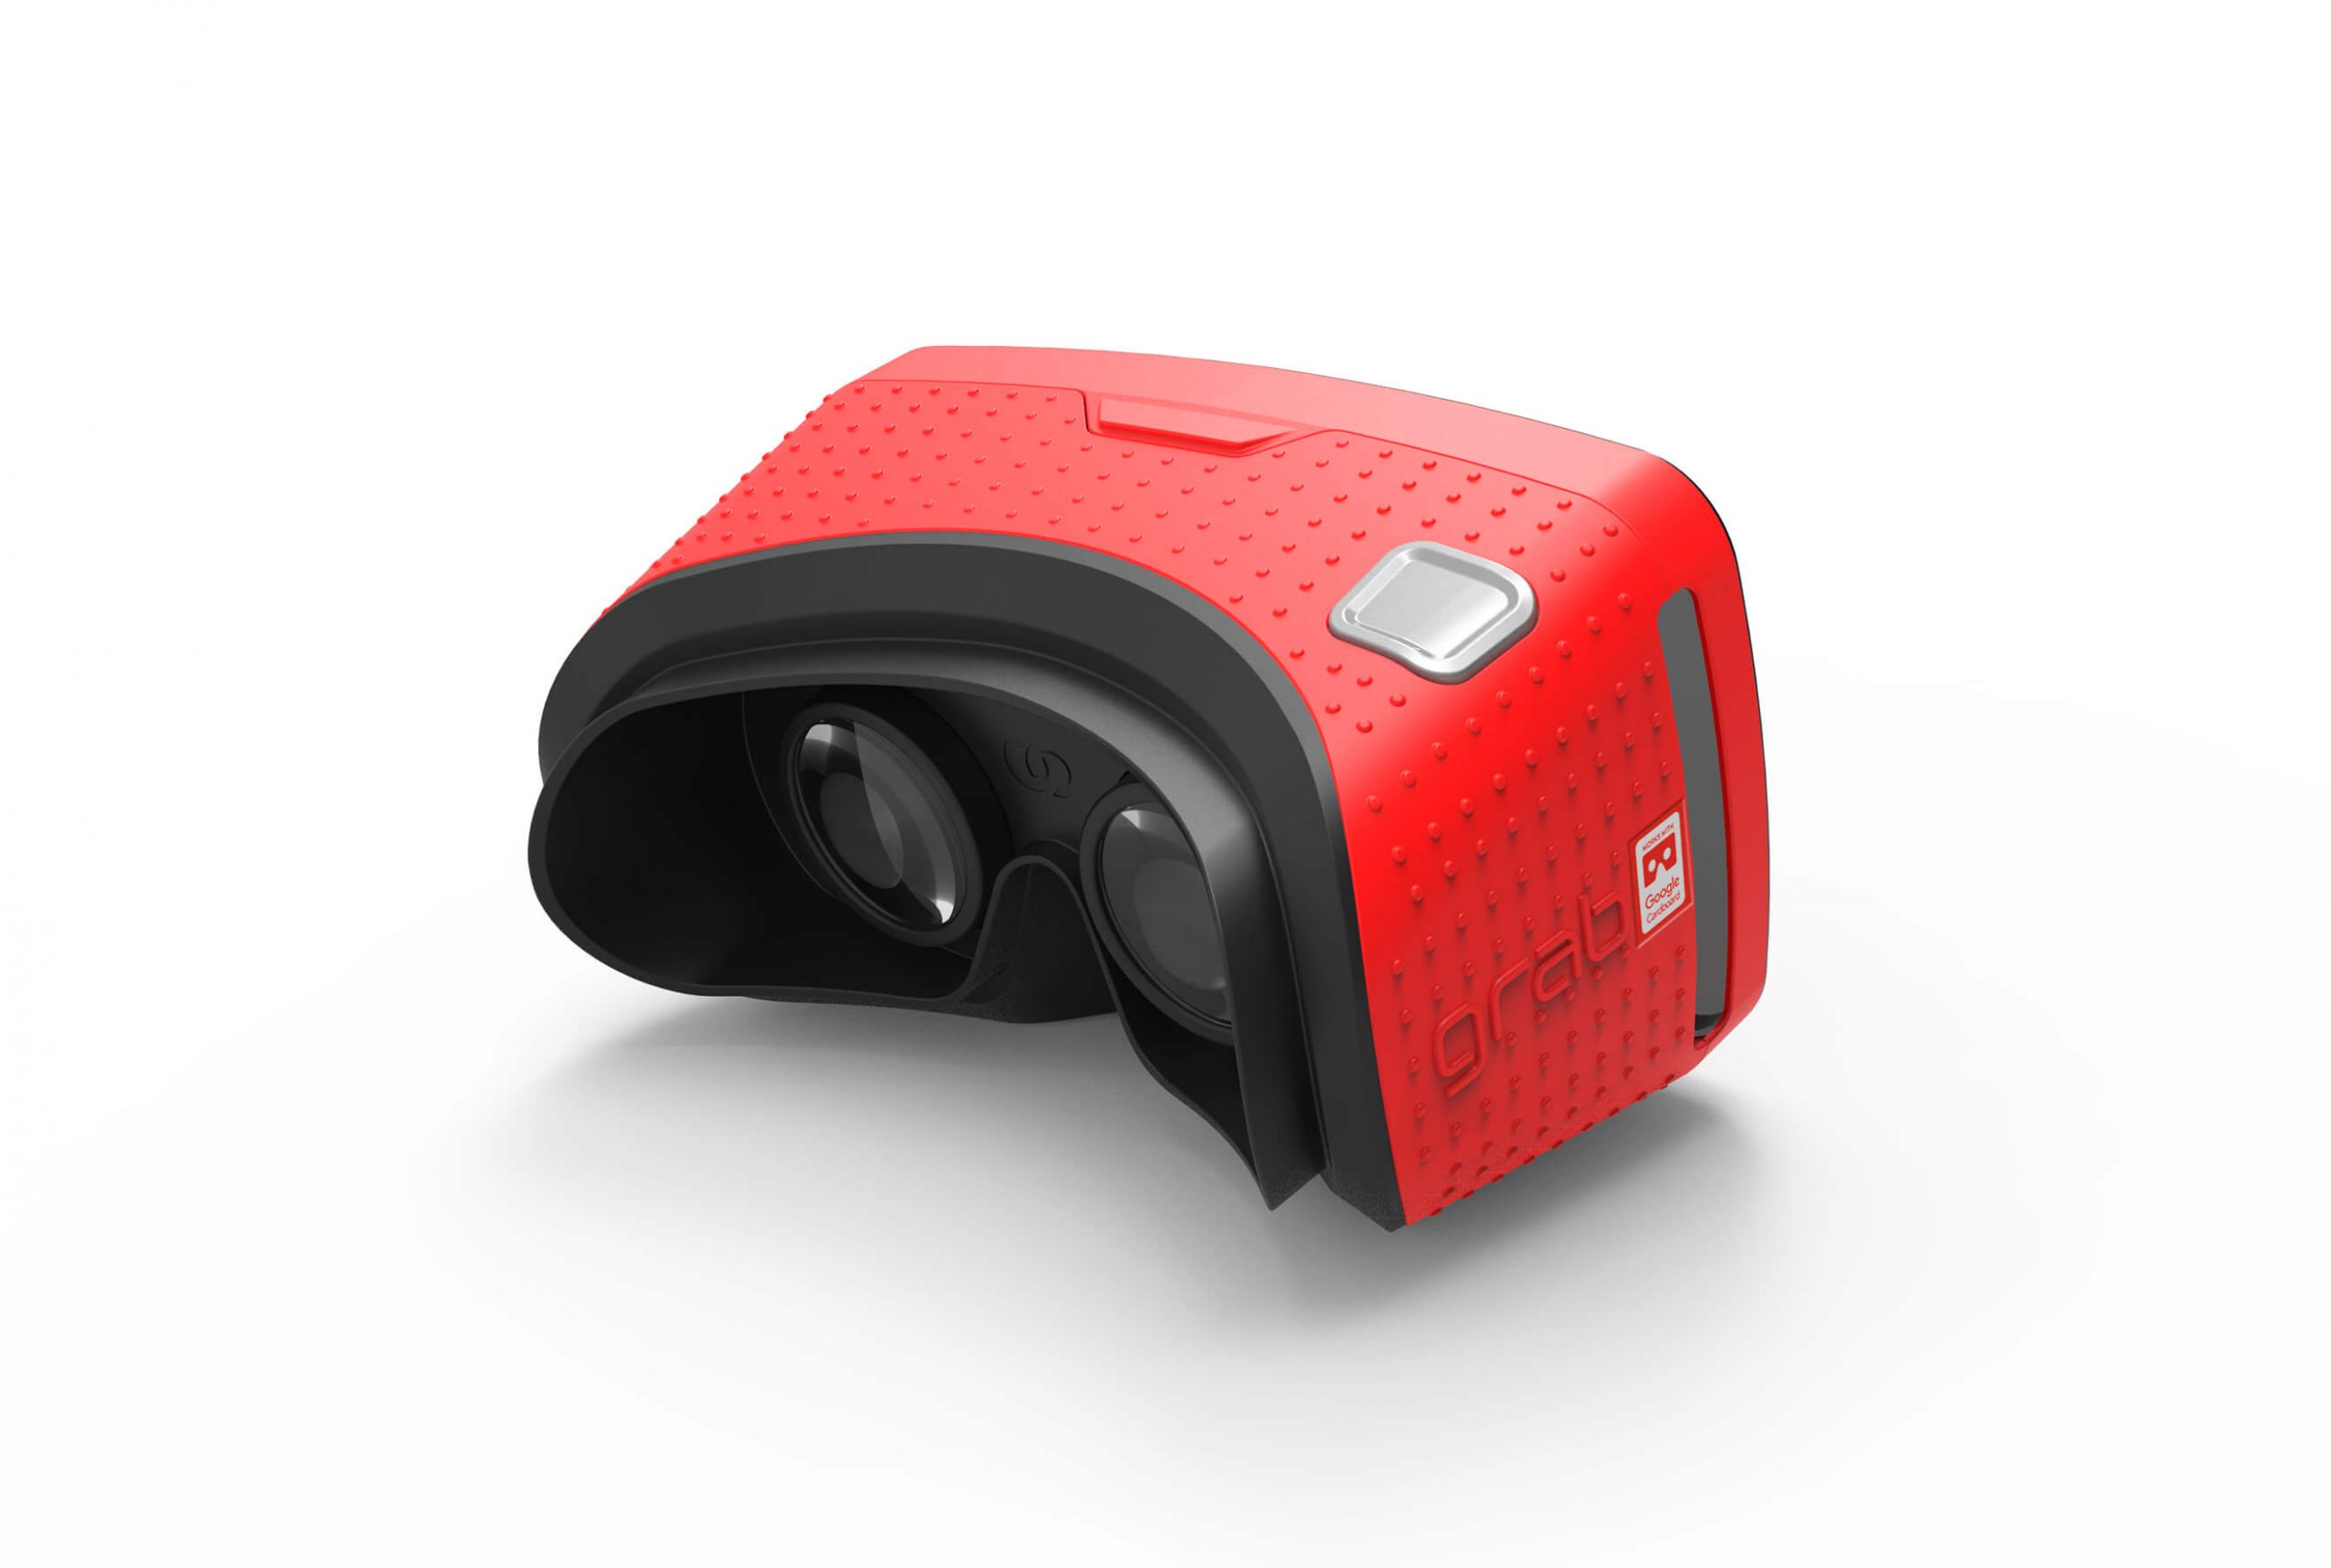 Homido GRAB Virtual Reality Headset for Smartphone Red